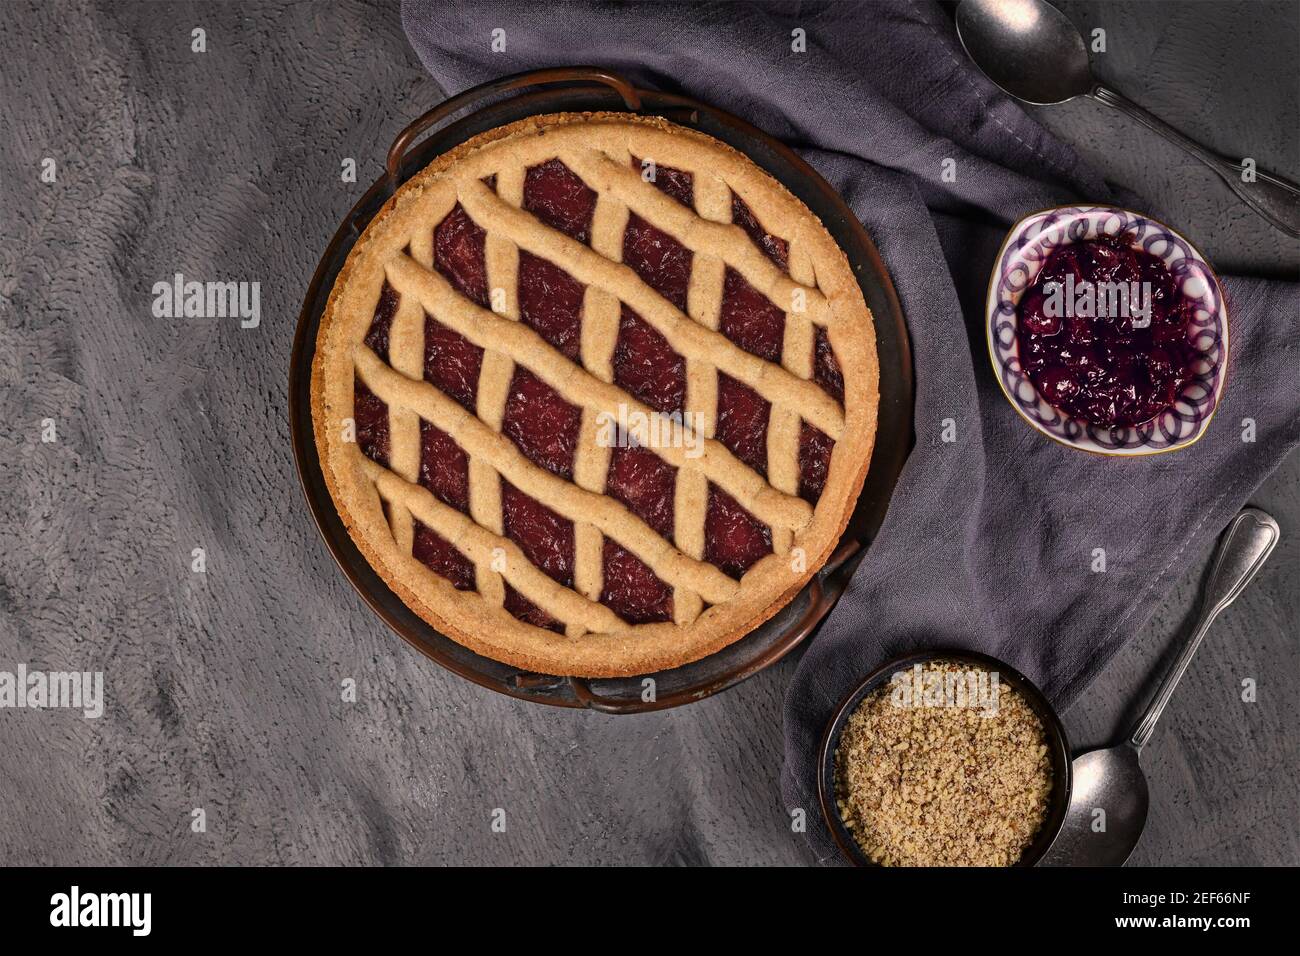 Top view of homemade pie called 'Linzer Torte', a traditional Austrian shortcake pastry topped with fruit preserves and sliced nuts with lattice desig Stock Photo